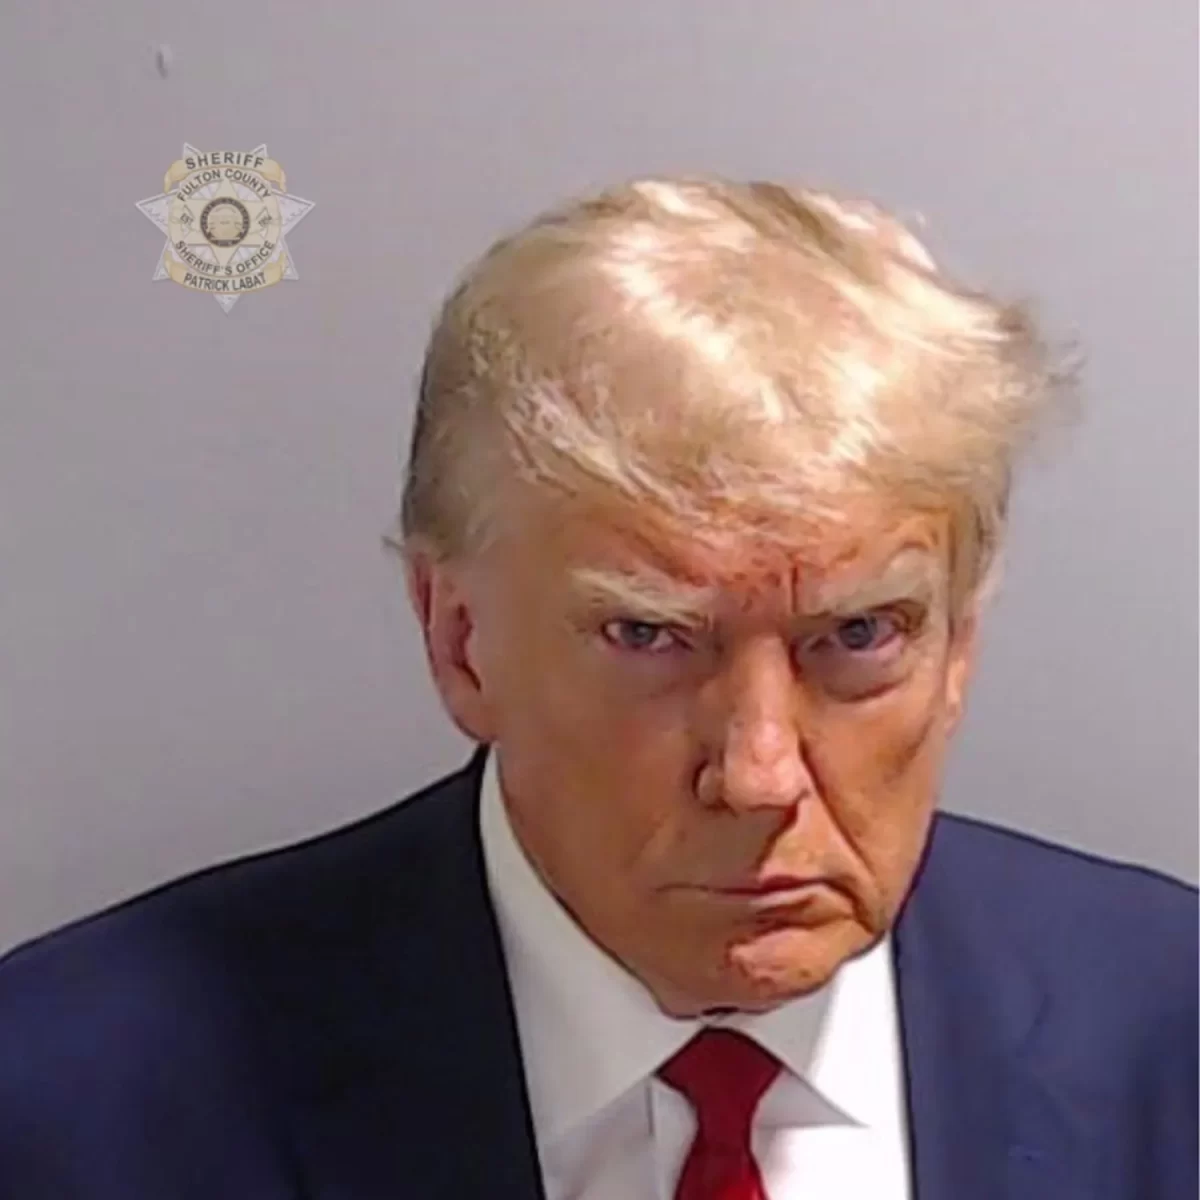 A photo of former President Donald Trumps mugshot in Fulton County Jail.